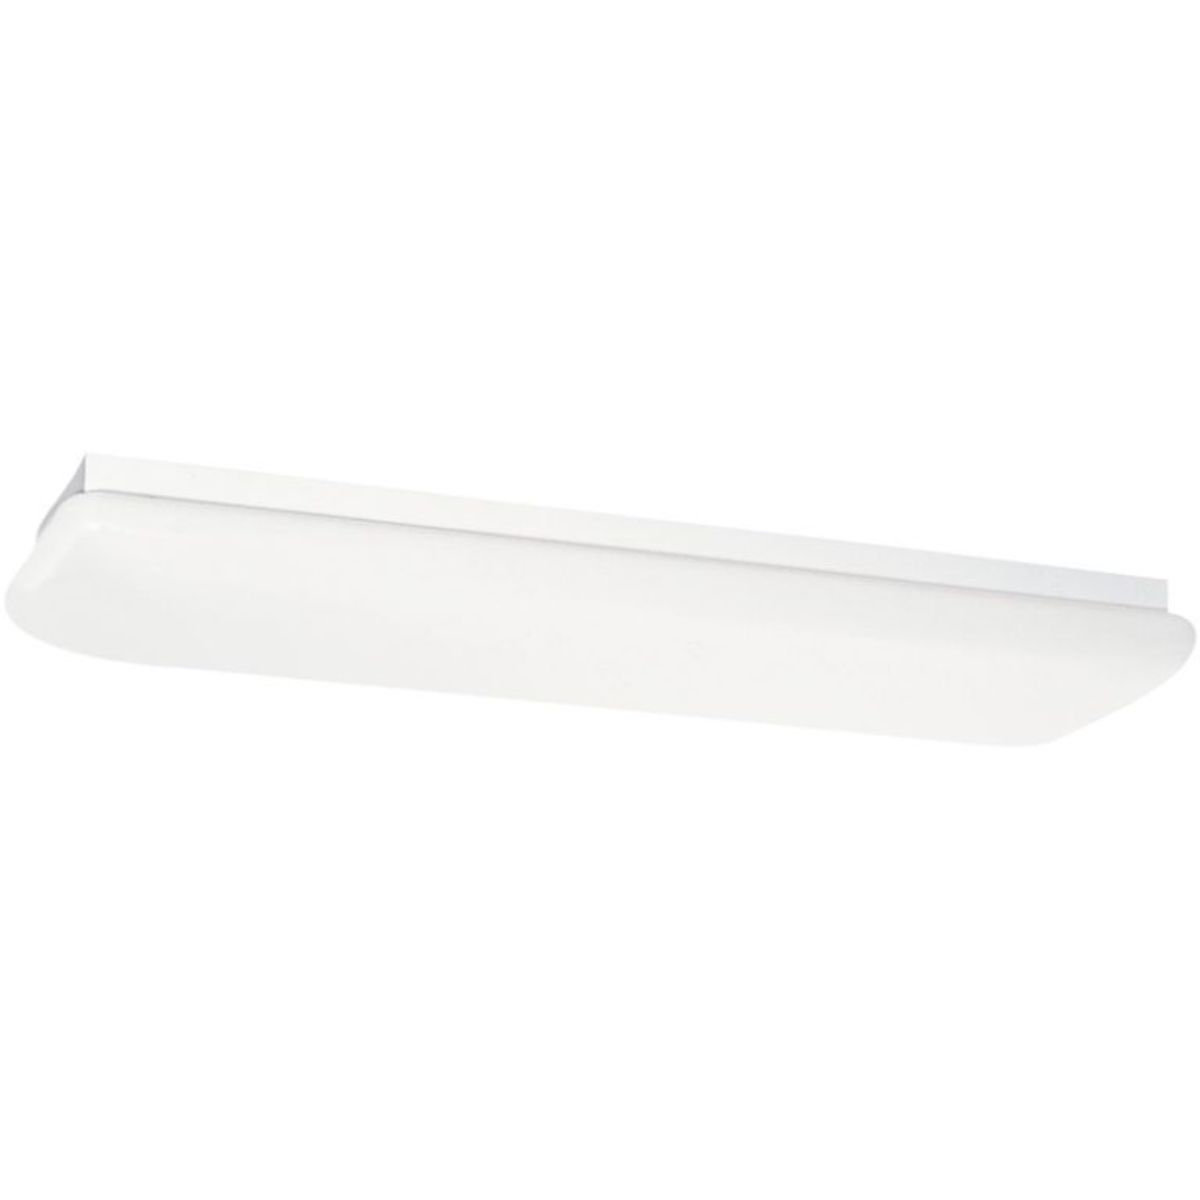 Fluorescent 52 in 2 Lights Ceiling Puff Light White Finish - Bees Lighting